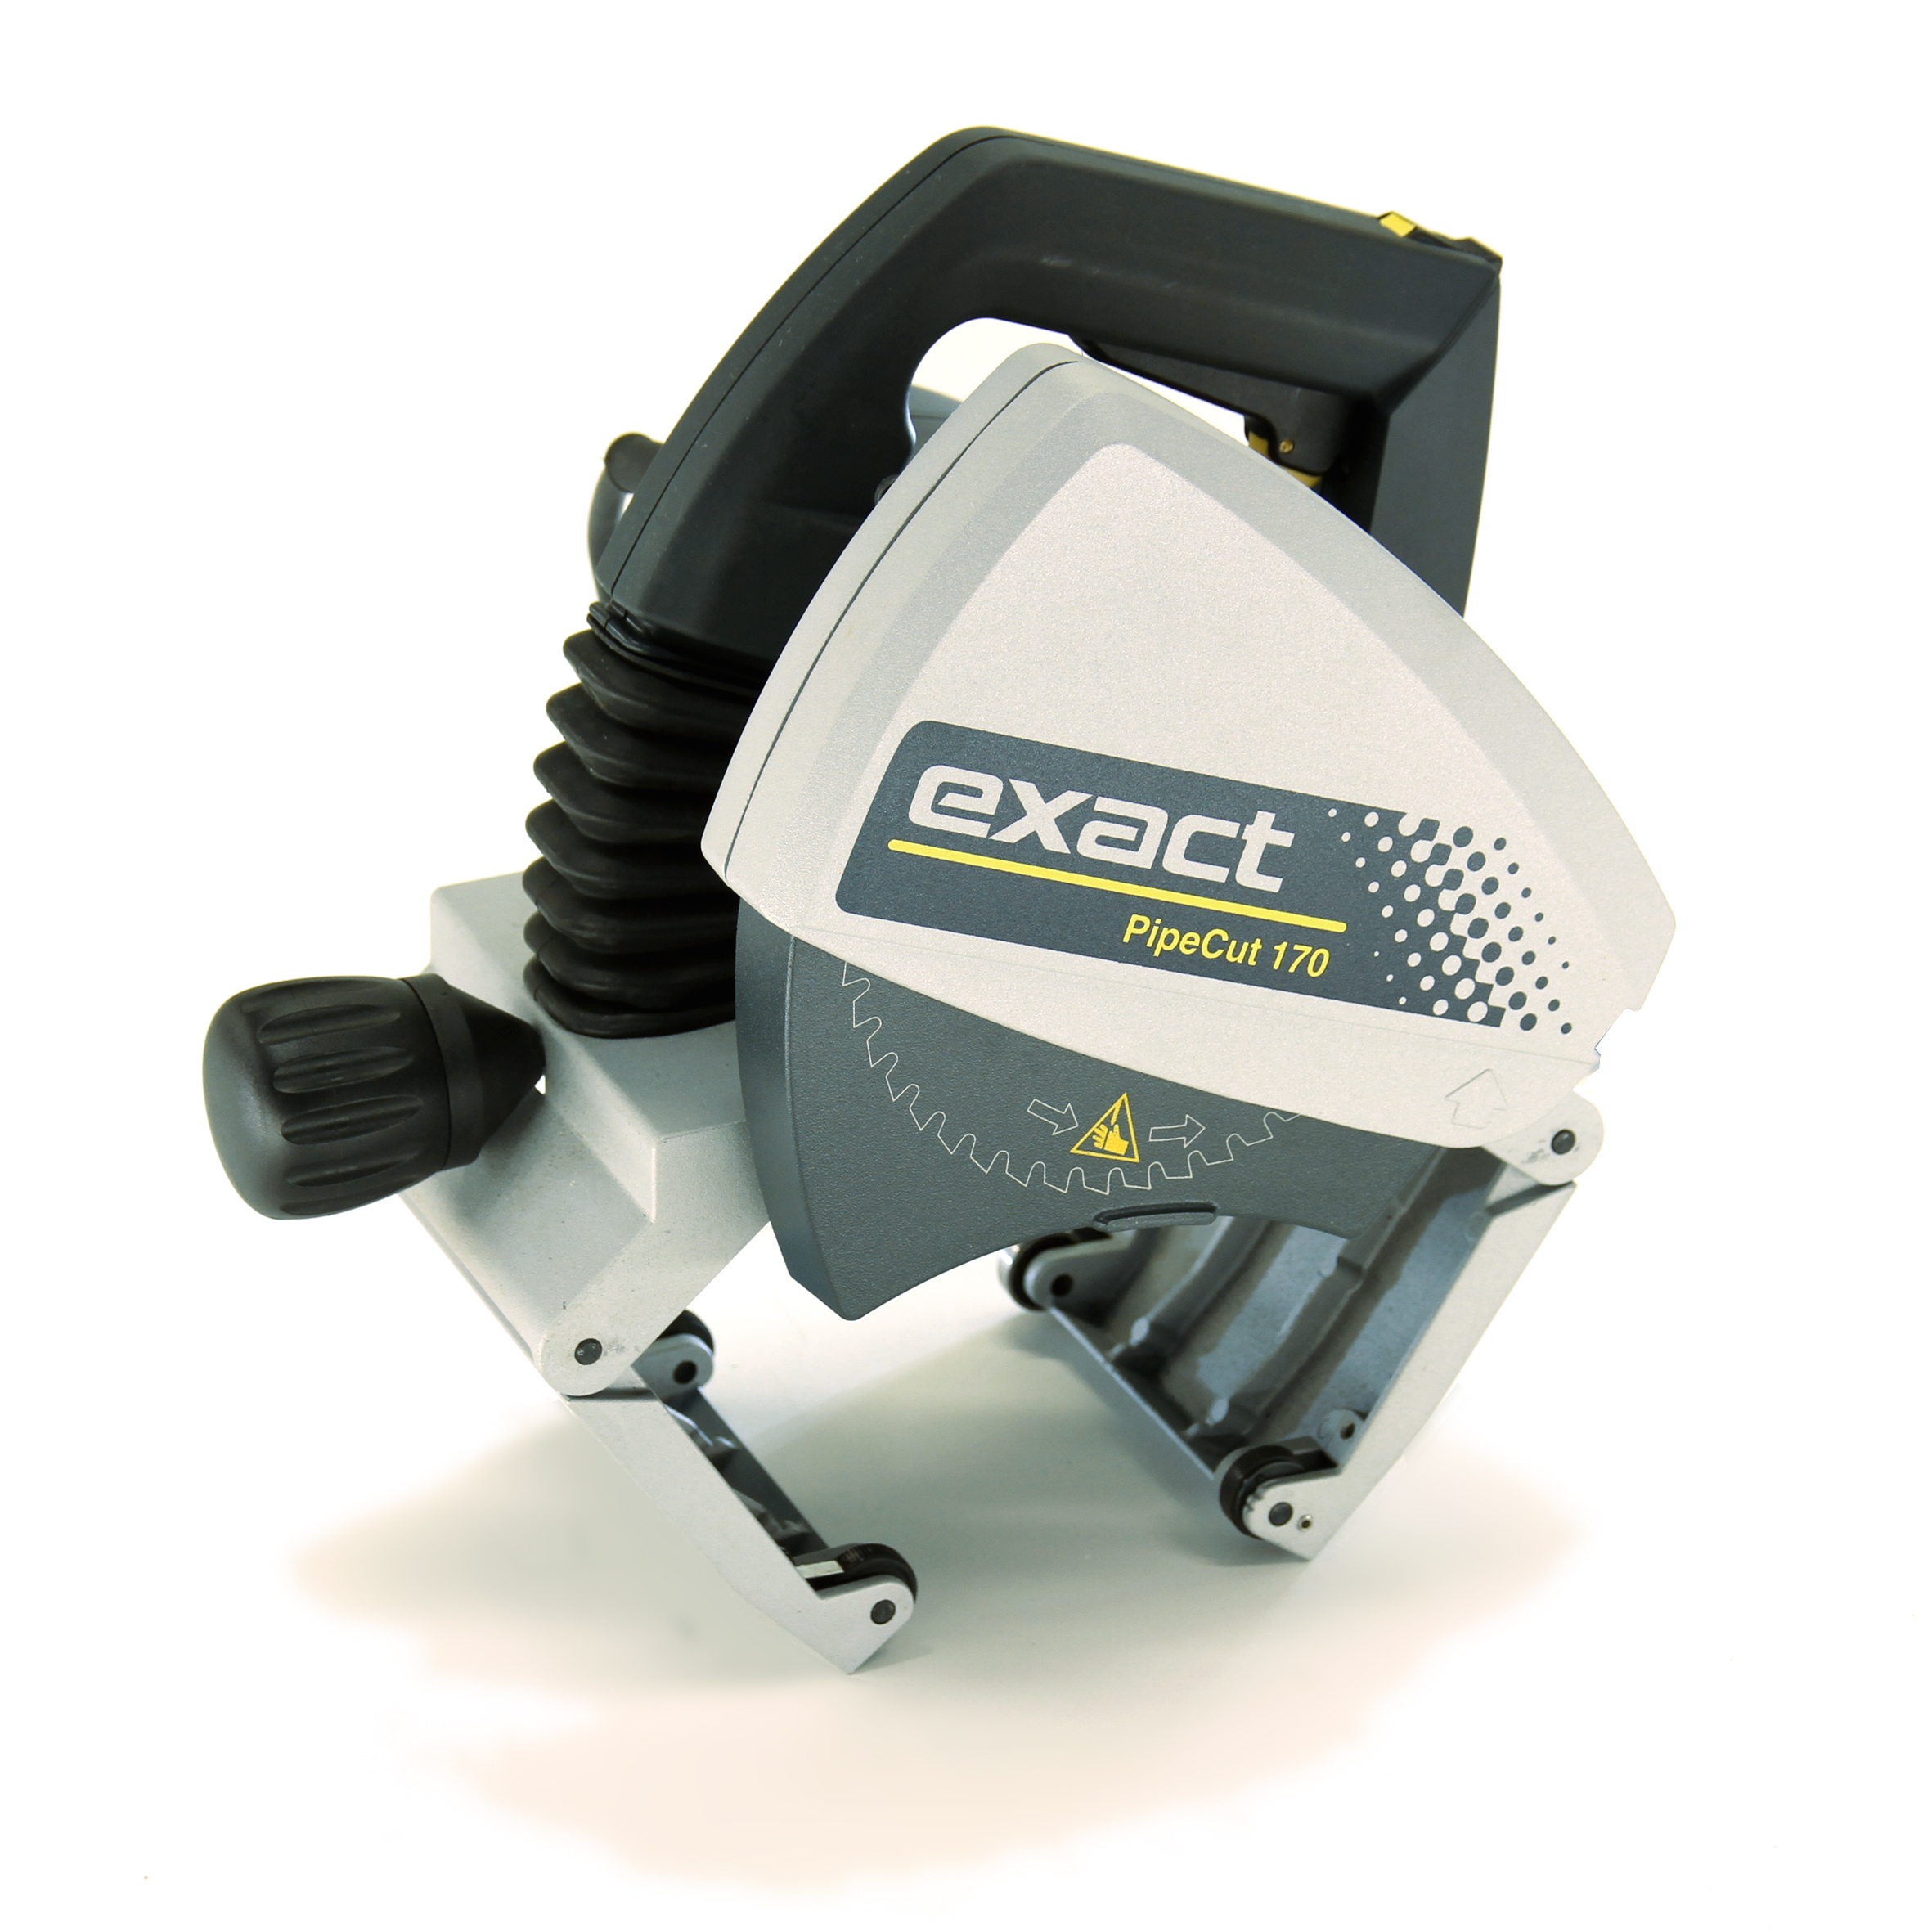 Exact PipeCut 170E System - Powerful & Small Pipe Saw - Exact Tools